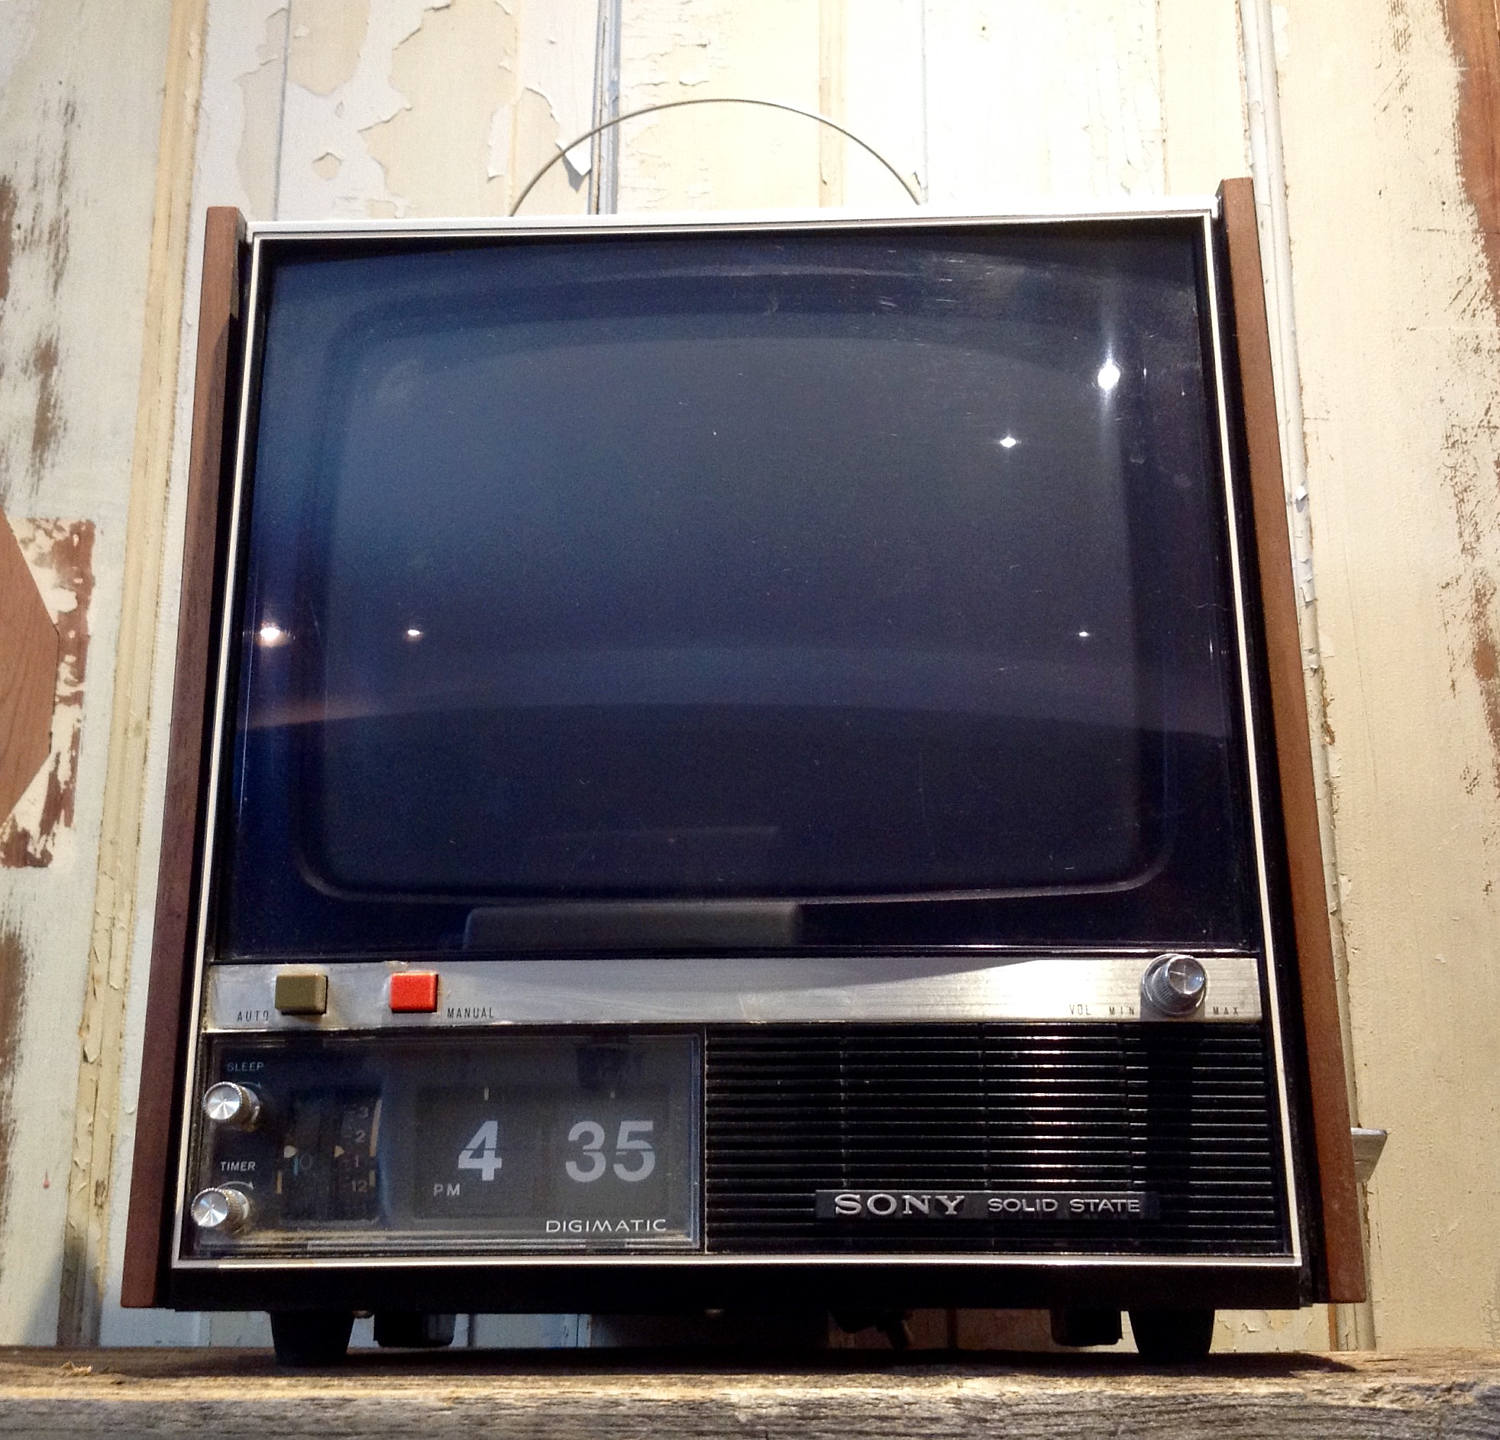 The SONY SOLID STATE Portable DIGIMATIC TELEVISION - Flip Clock Fans Forum